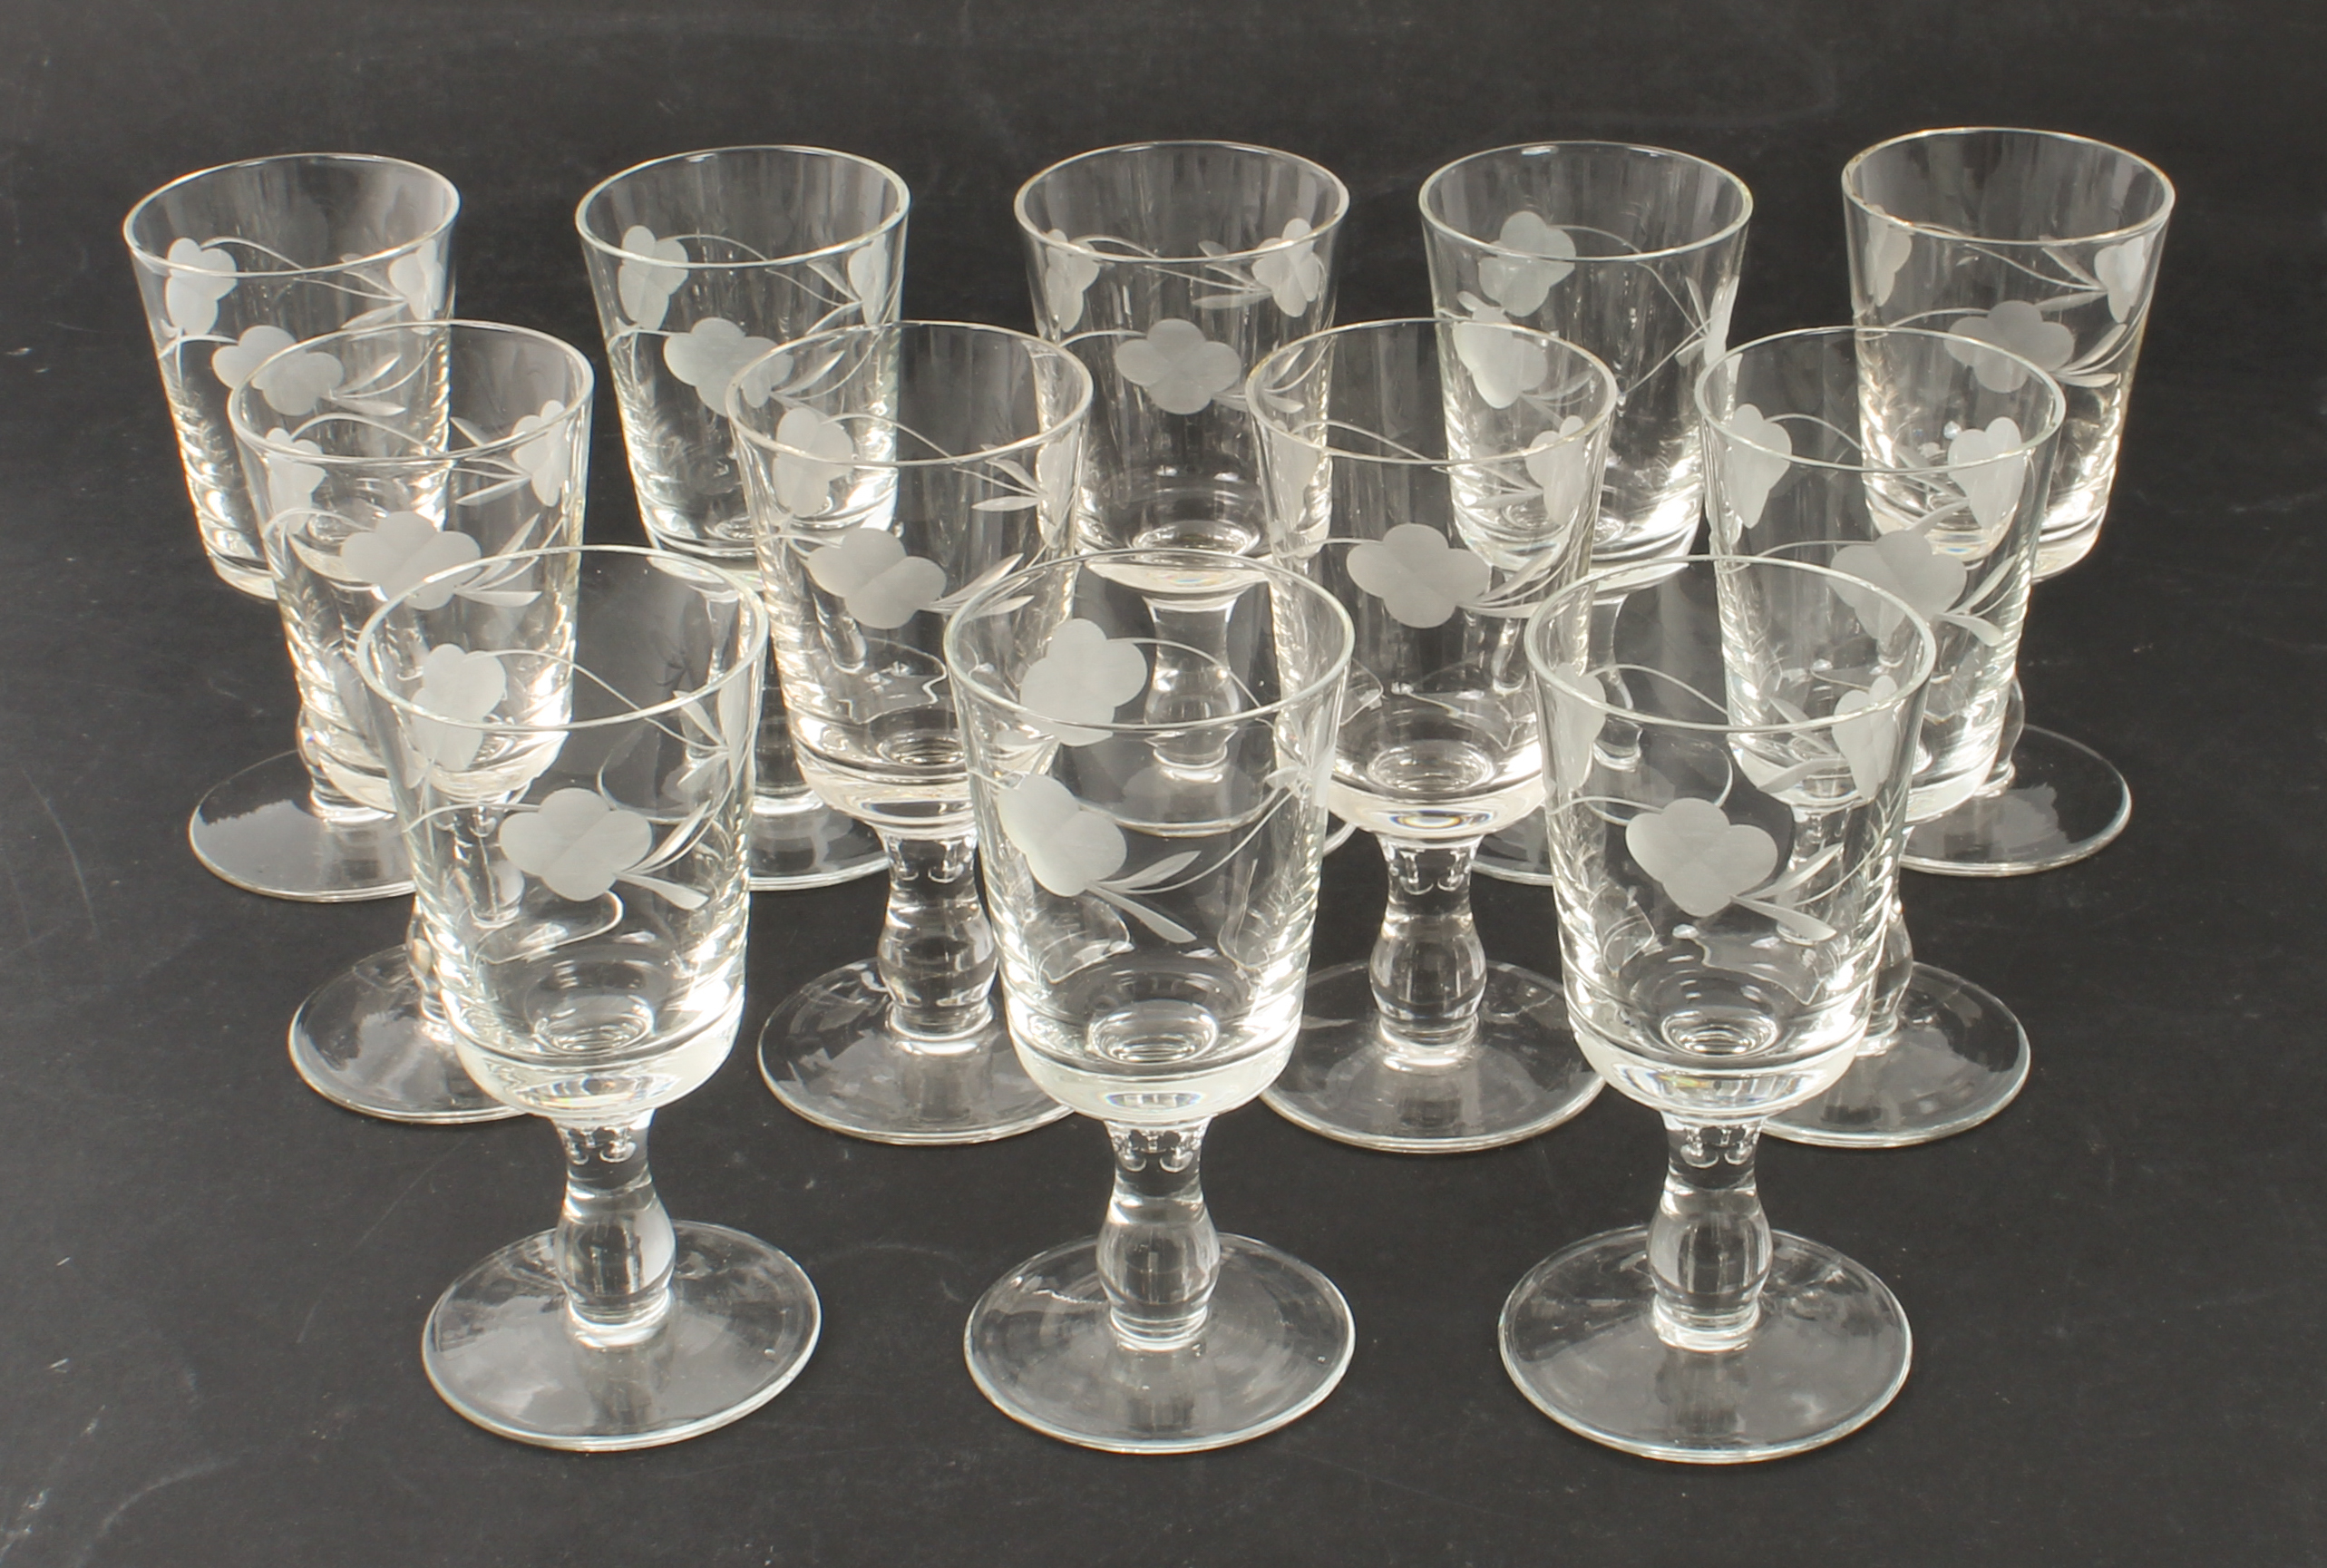 A set of twelve port glasses - 1950s-60s, the bucket bowls wheel-engraved with trailing flowers,